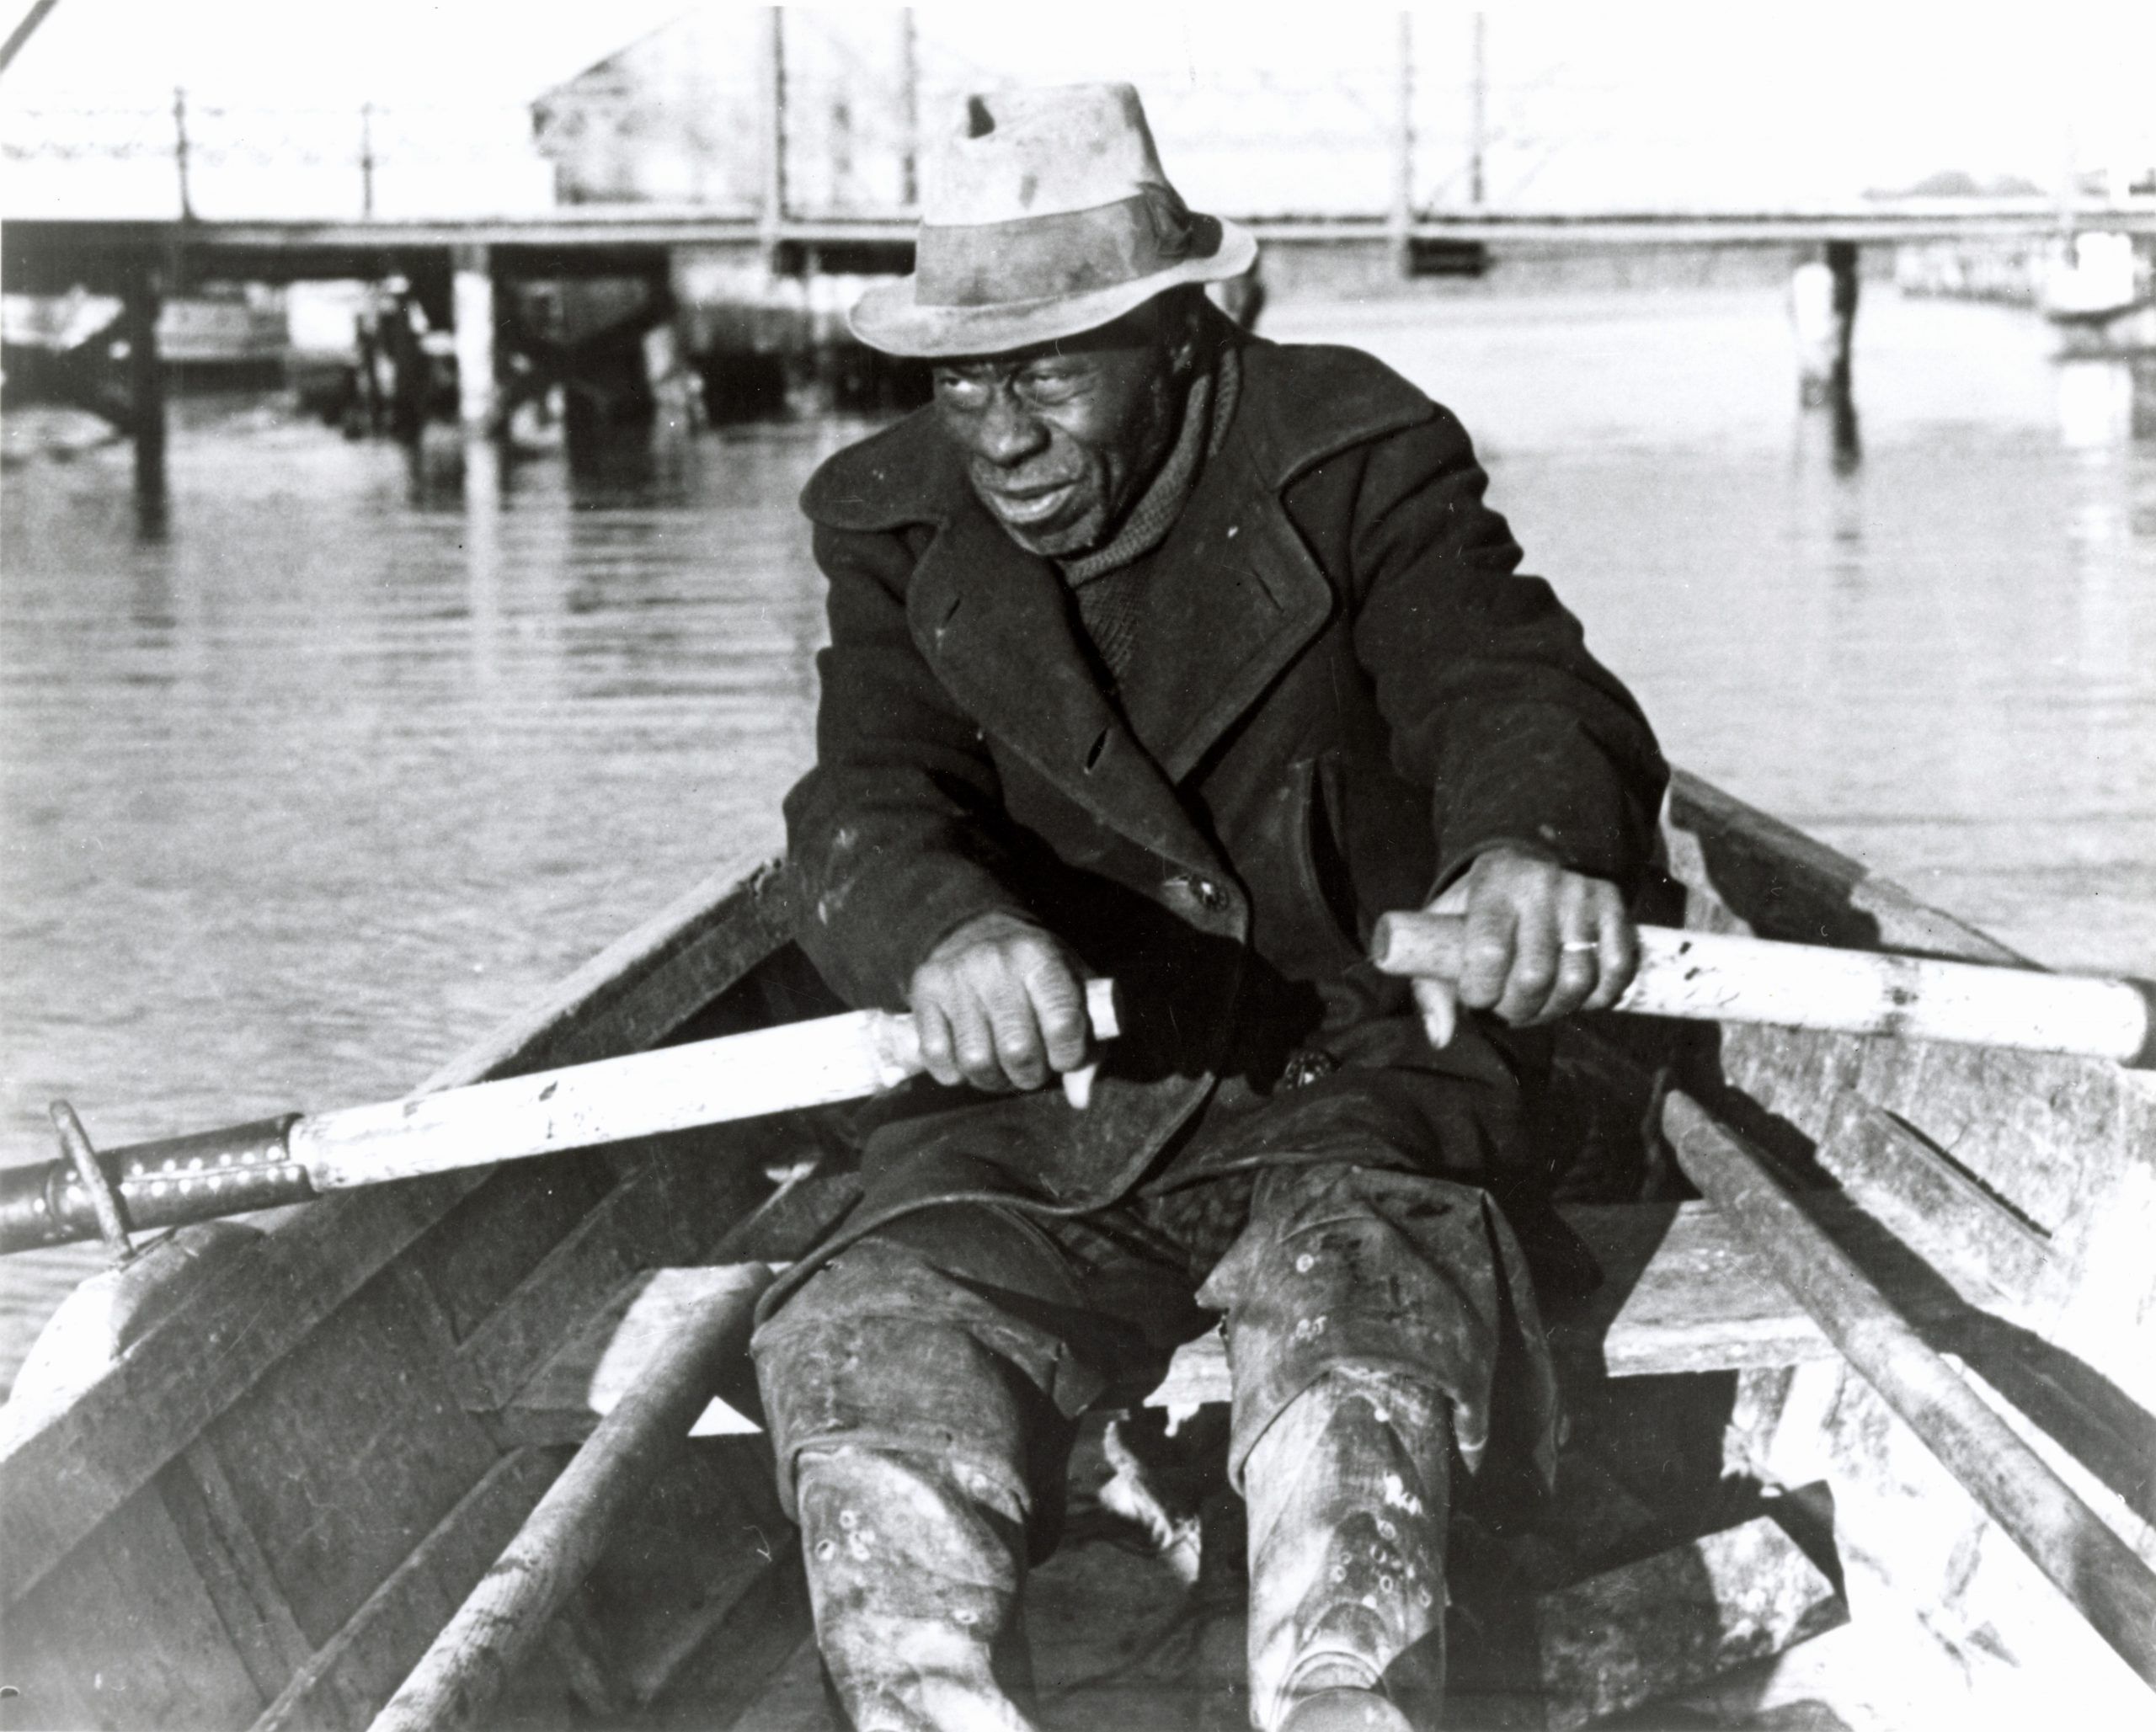 Person with a hat and heavy coat rowing a boat on the Dismal Swamp.